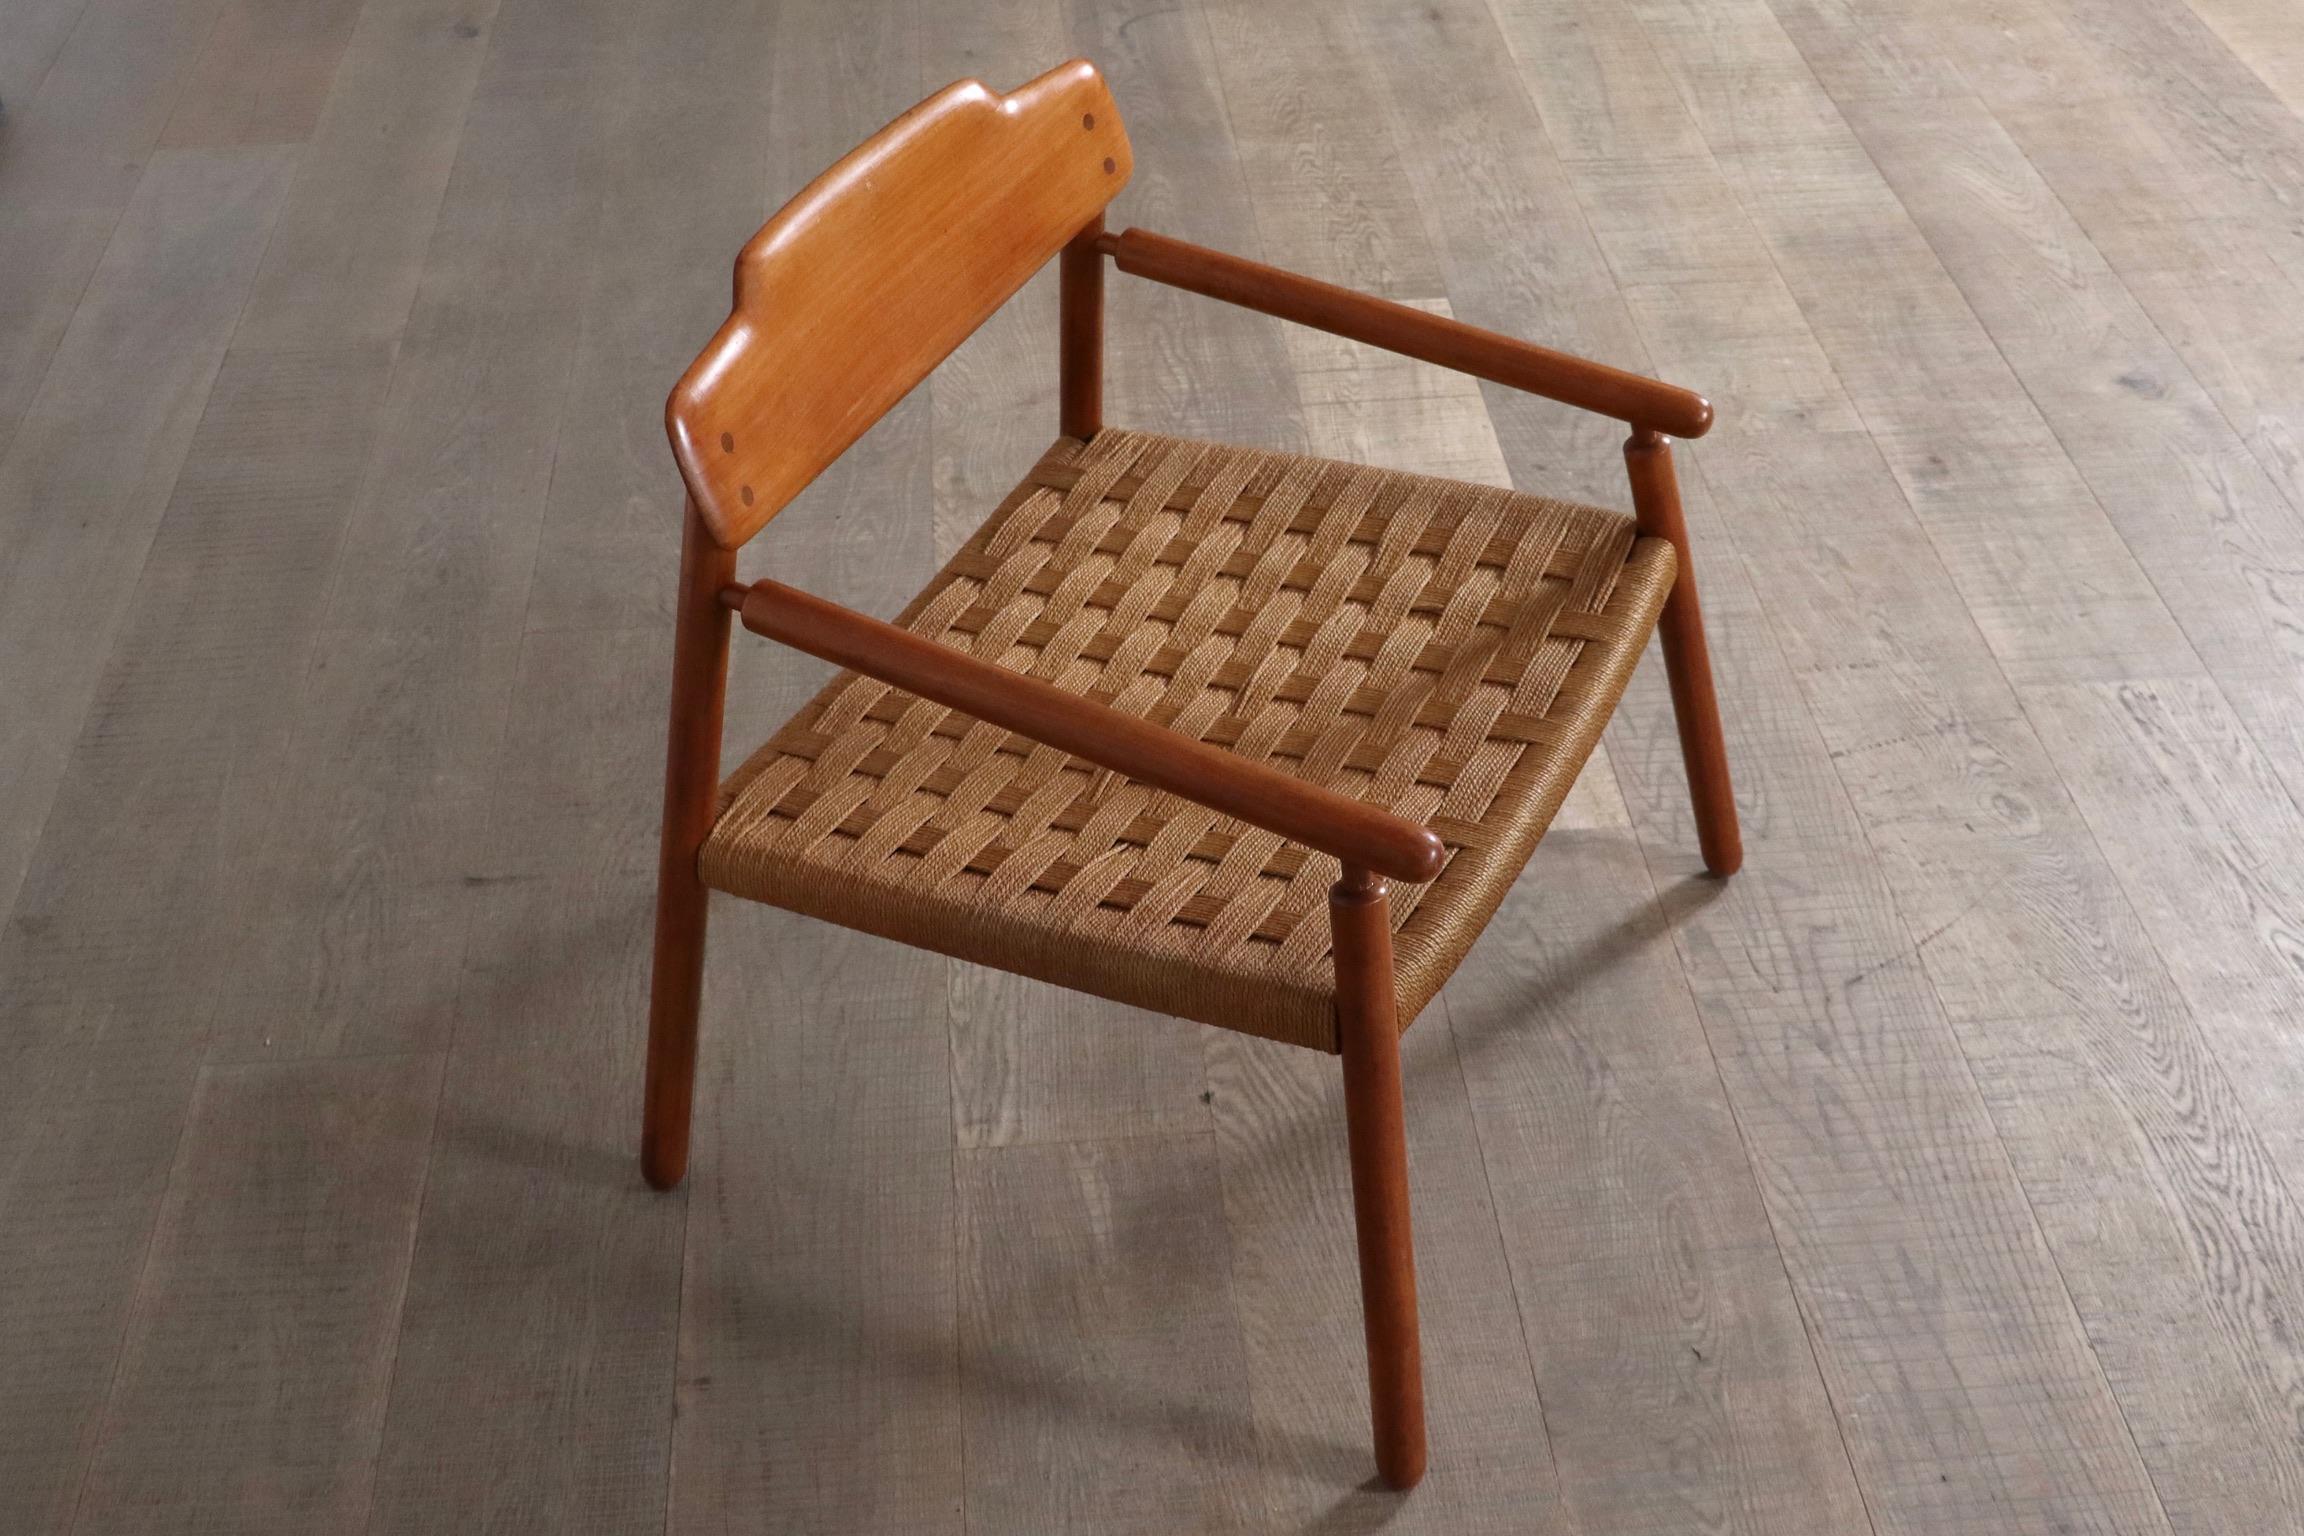 Midcentury Minimalistic Easy Chair In Oak And Papercord, Finland 1950s For Sale 7